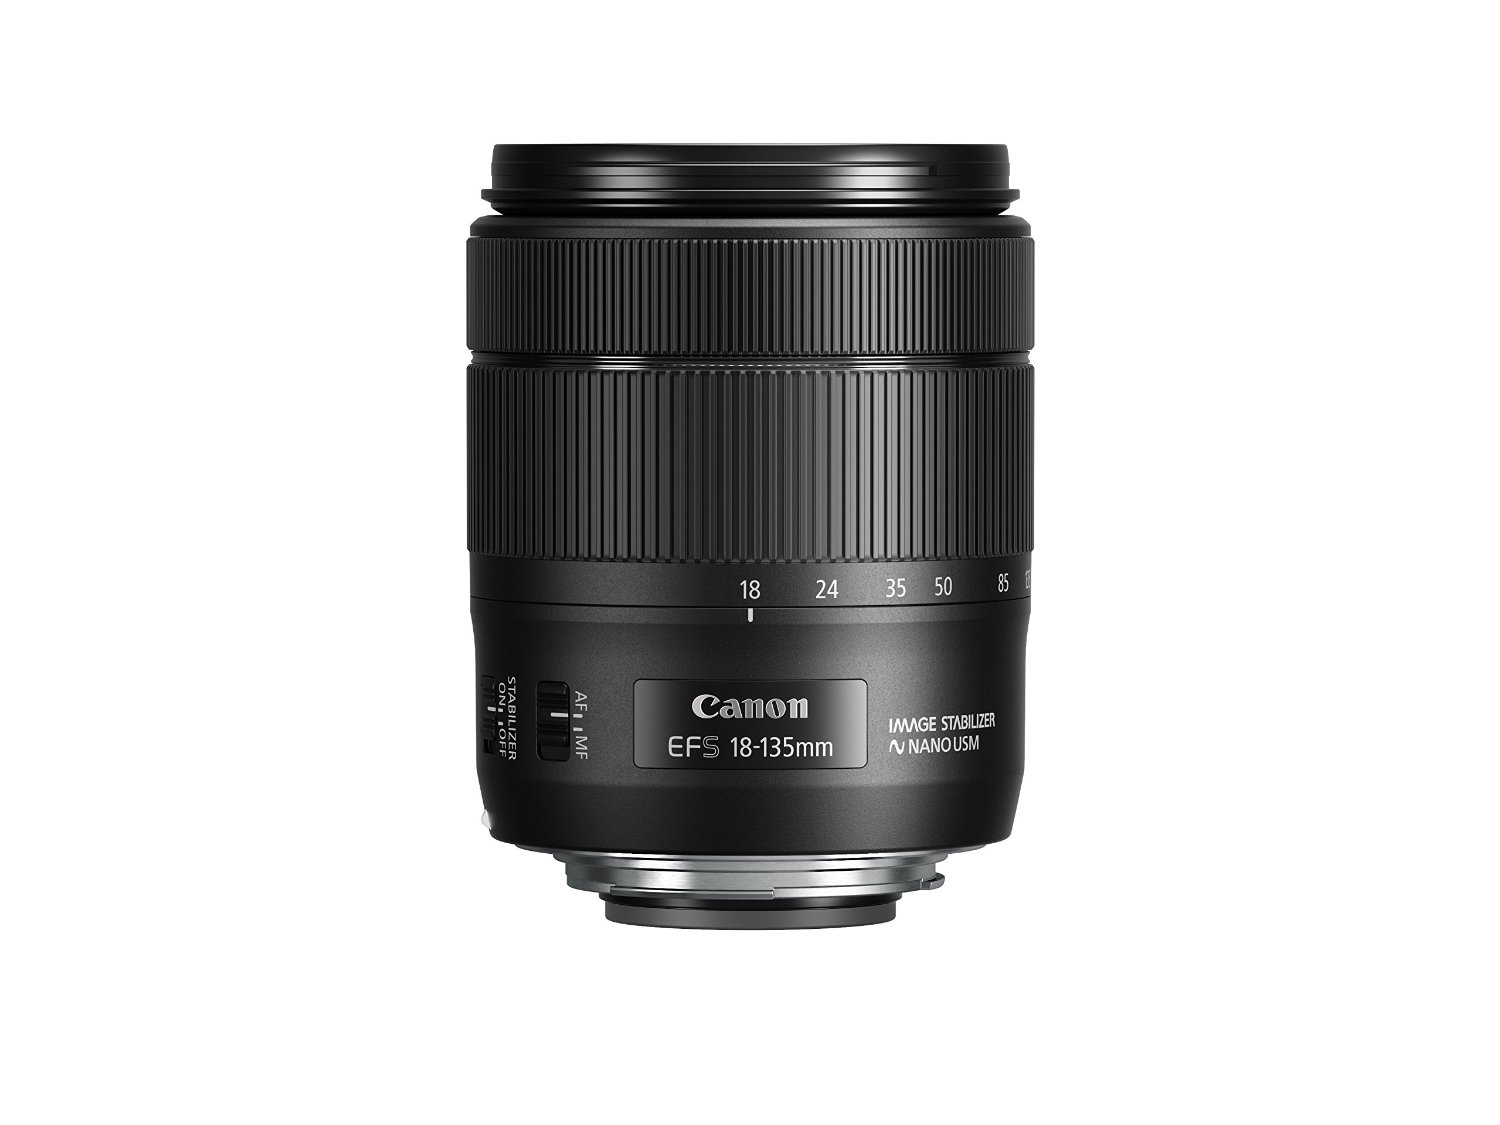 Canon EF-S 18-135mm f/3.5-5.6 IS USM Review | Ehab Photography